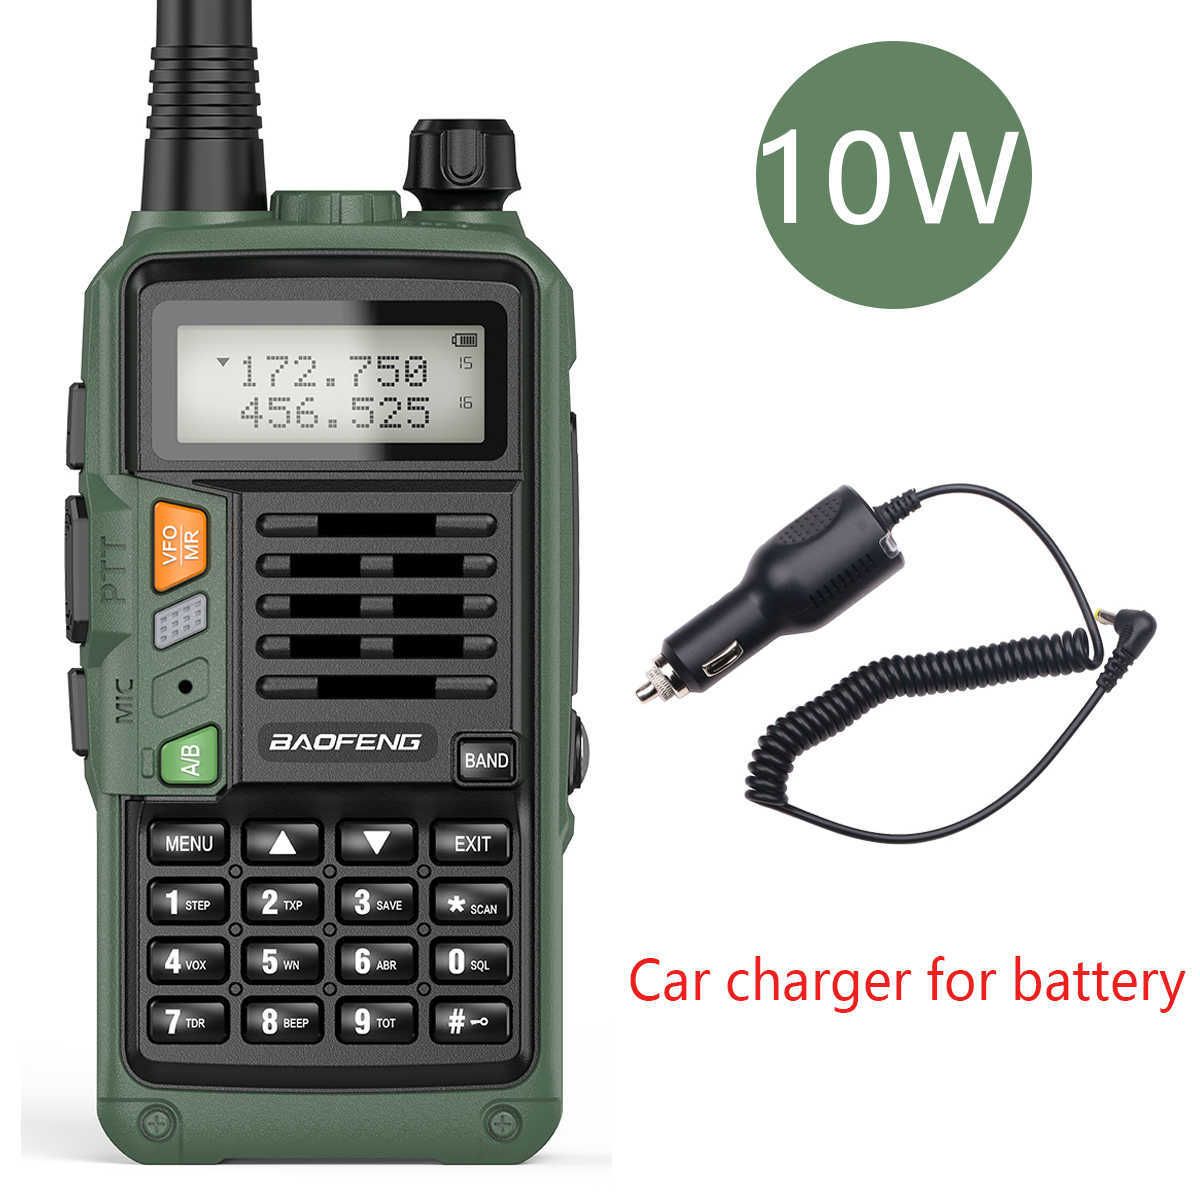 10w-car Charger